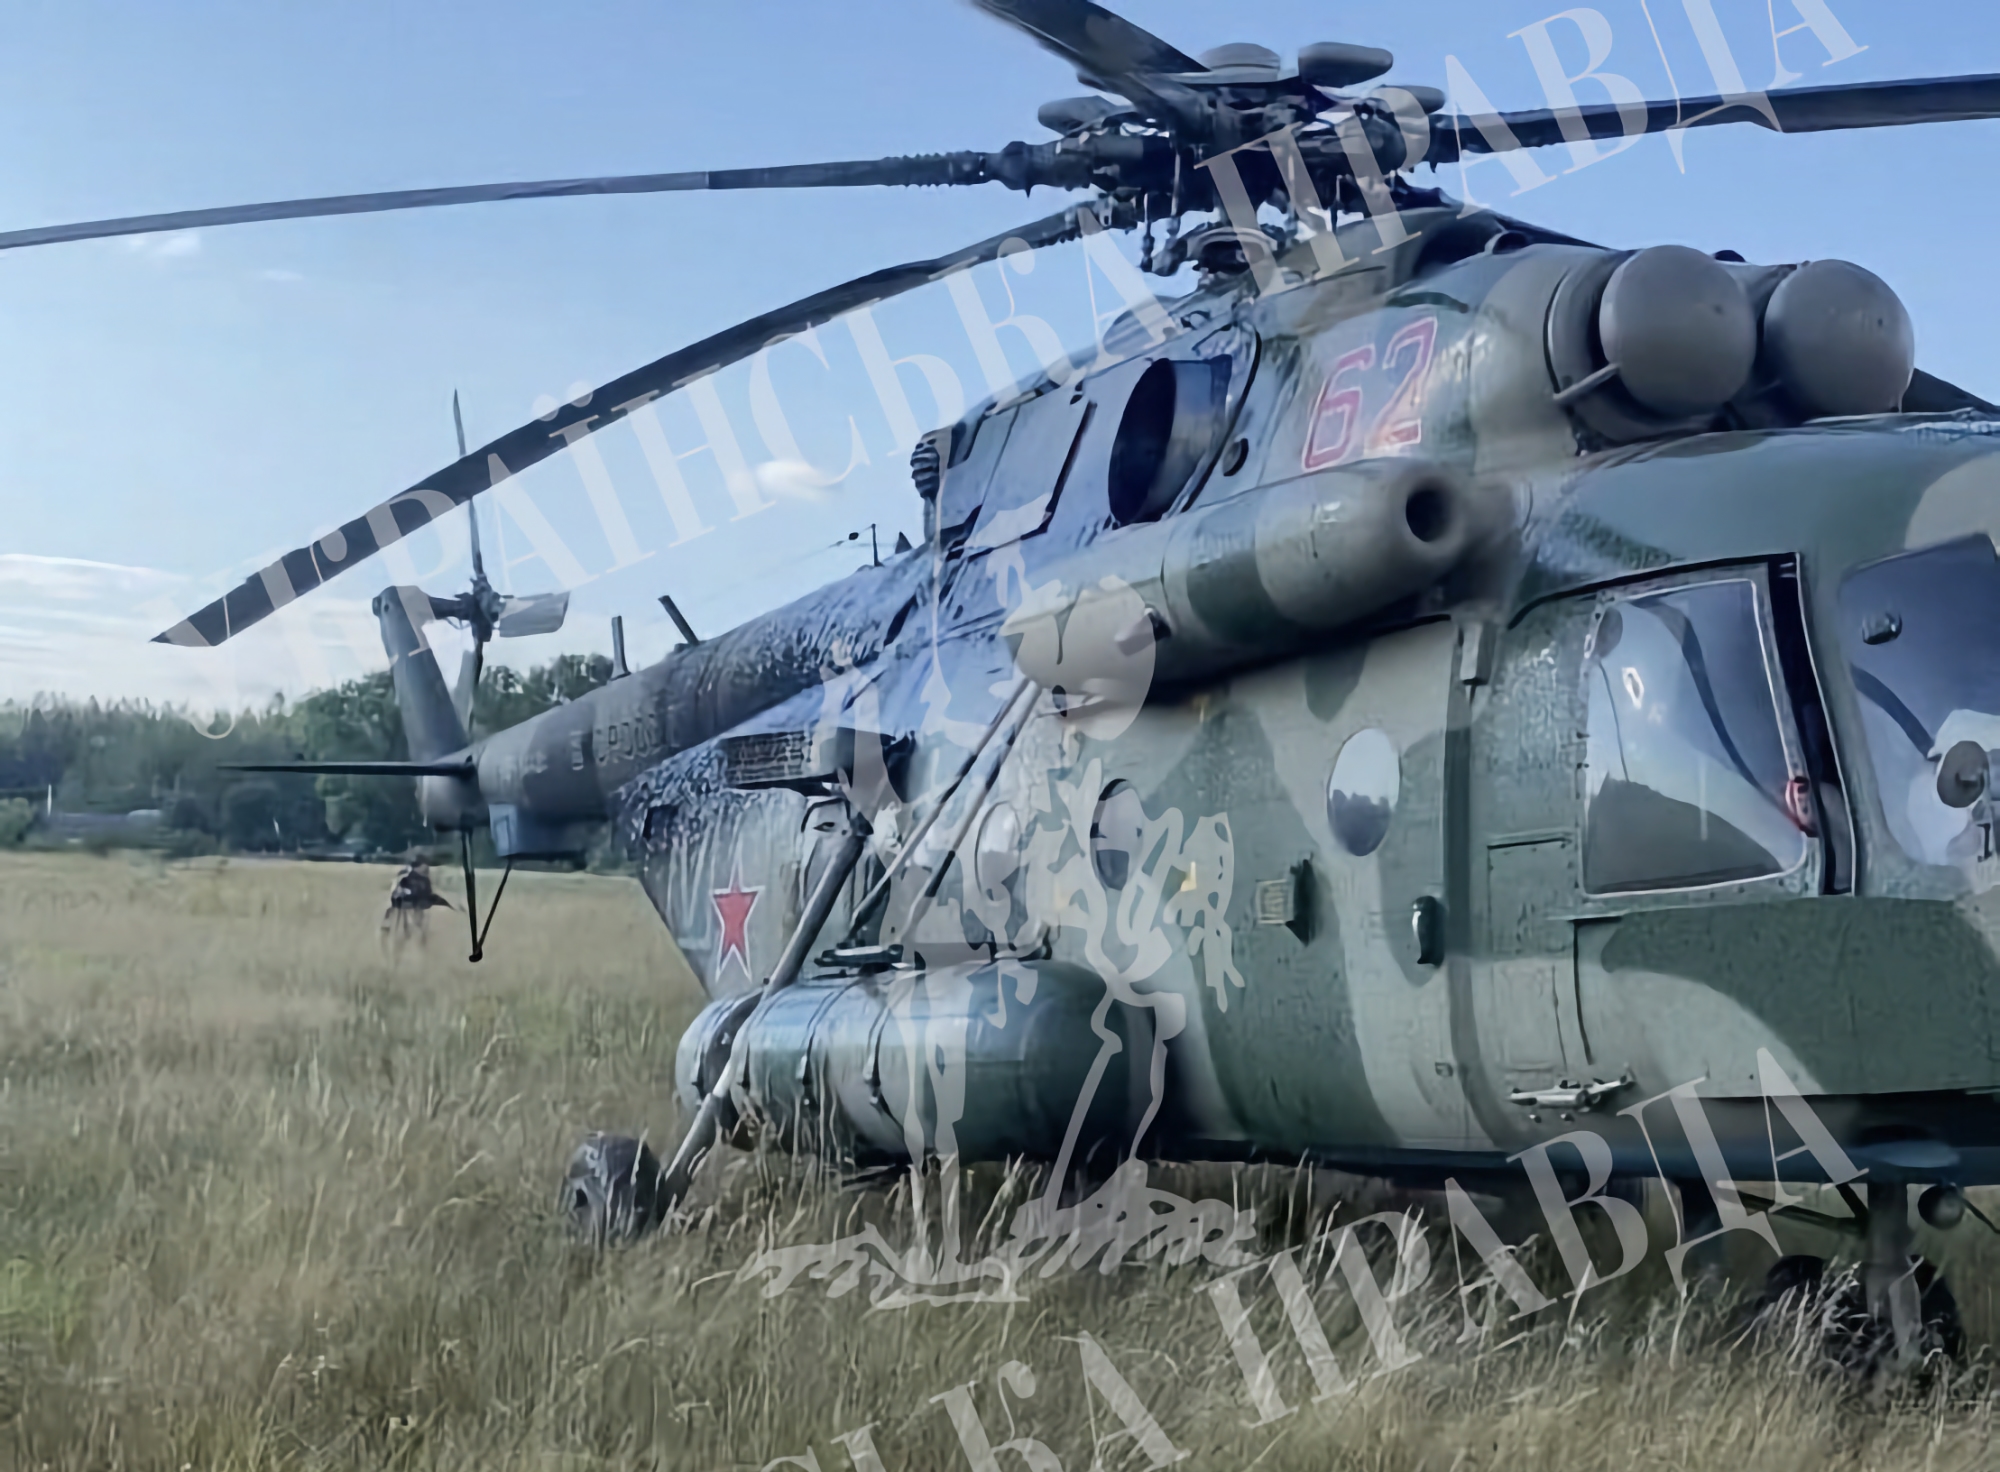 The General Directorate of Intelligence lured a Russian Mi-8 helicopter into Ukraine, with spare parts for Su-27 and Su-30 fighter jets on board